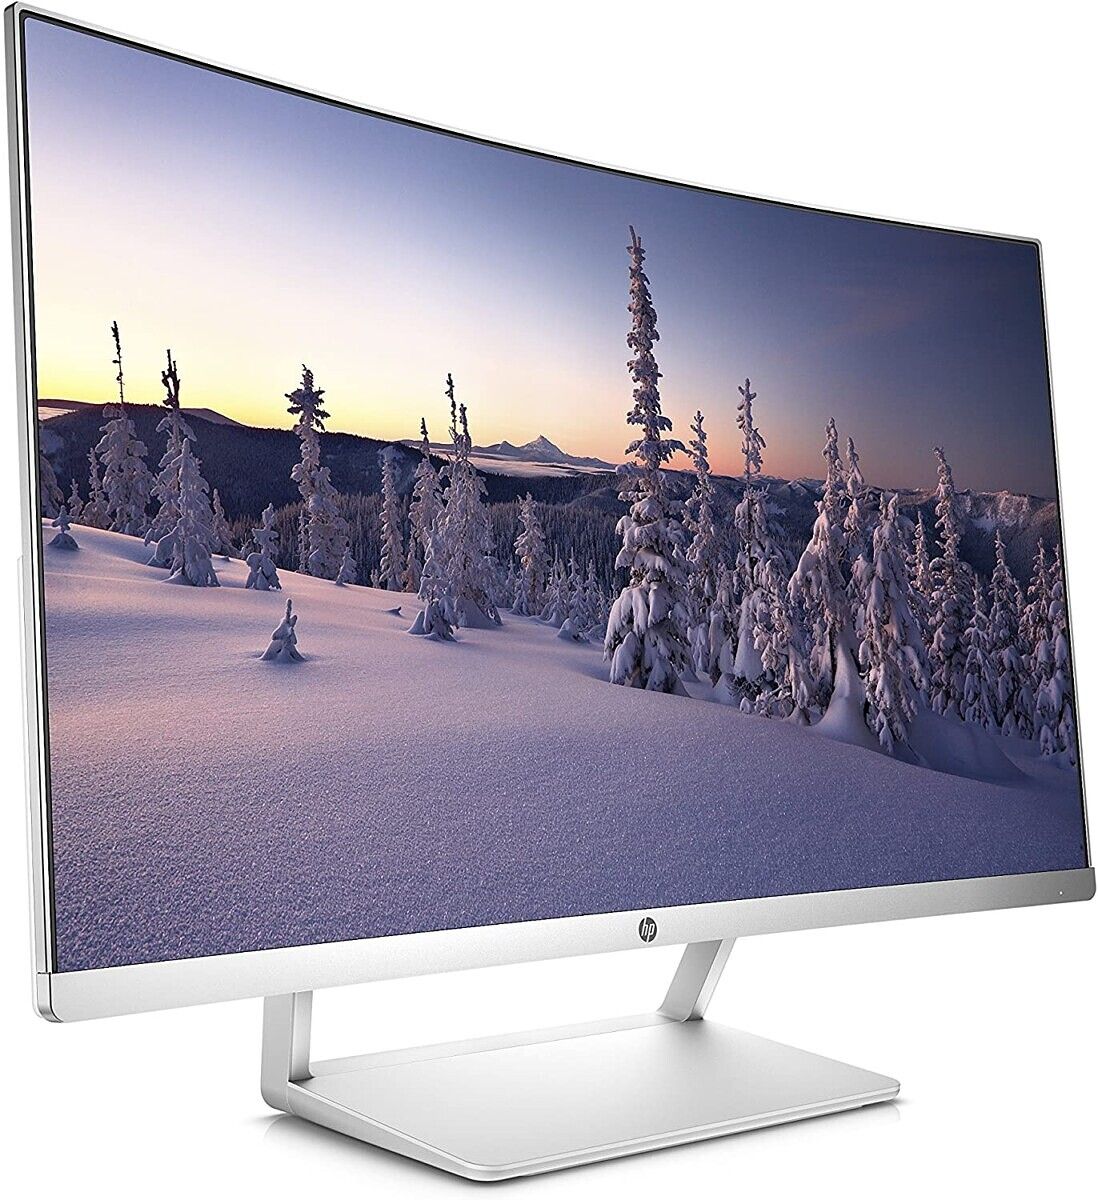 If you're looking for a non-ultrawide, curved monitor that won't break the bank, HP's 27-inch monitor will do the job and do it well. Right now, it's only $200 at Staples, so if you're interested, grab one before it sells out!